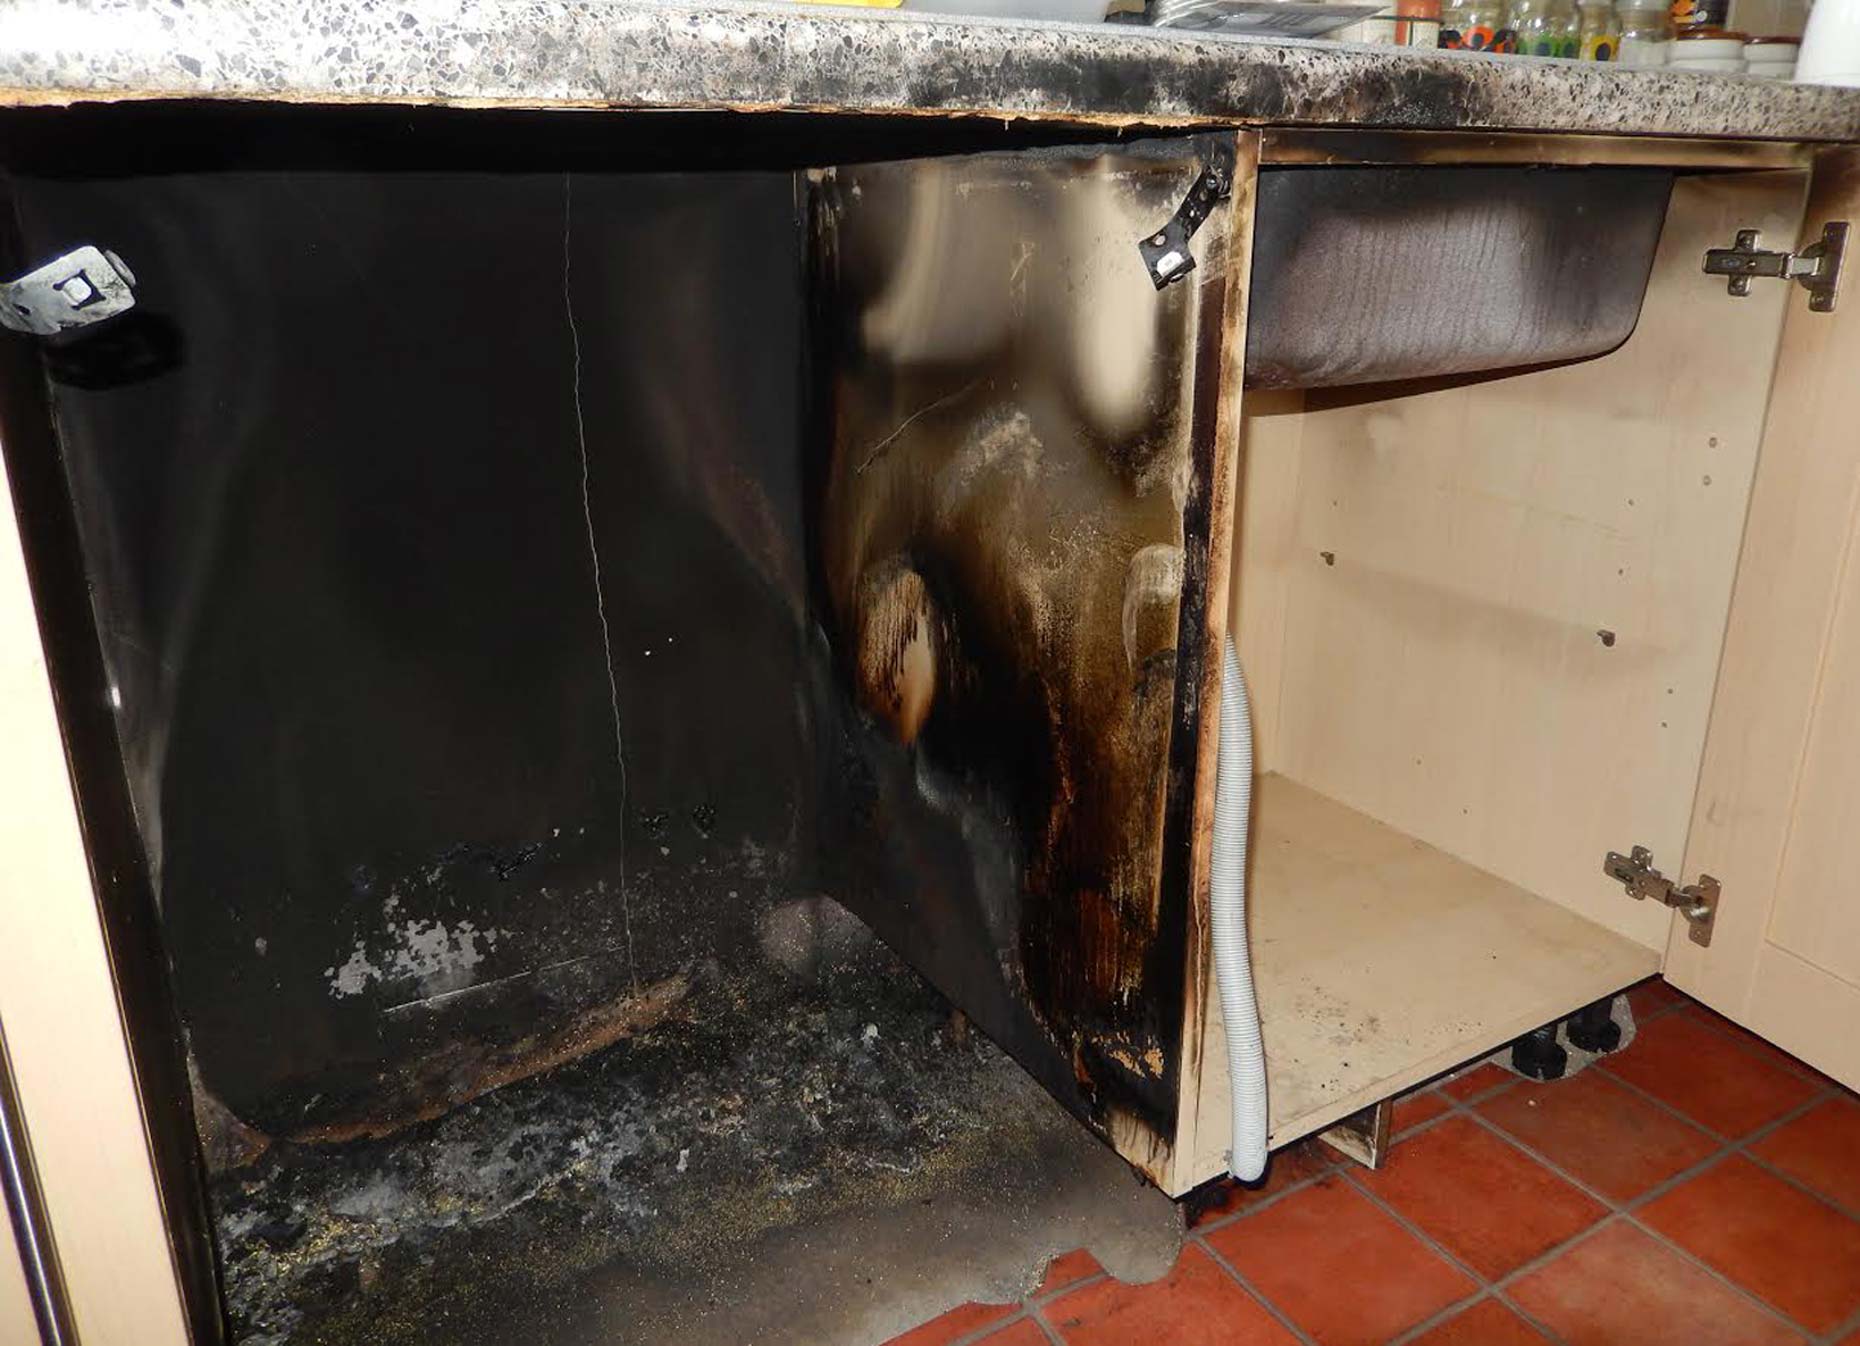 There was serious damage to the homeowner's kitchen.